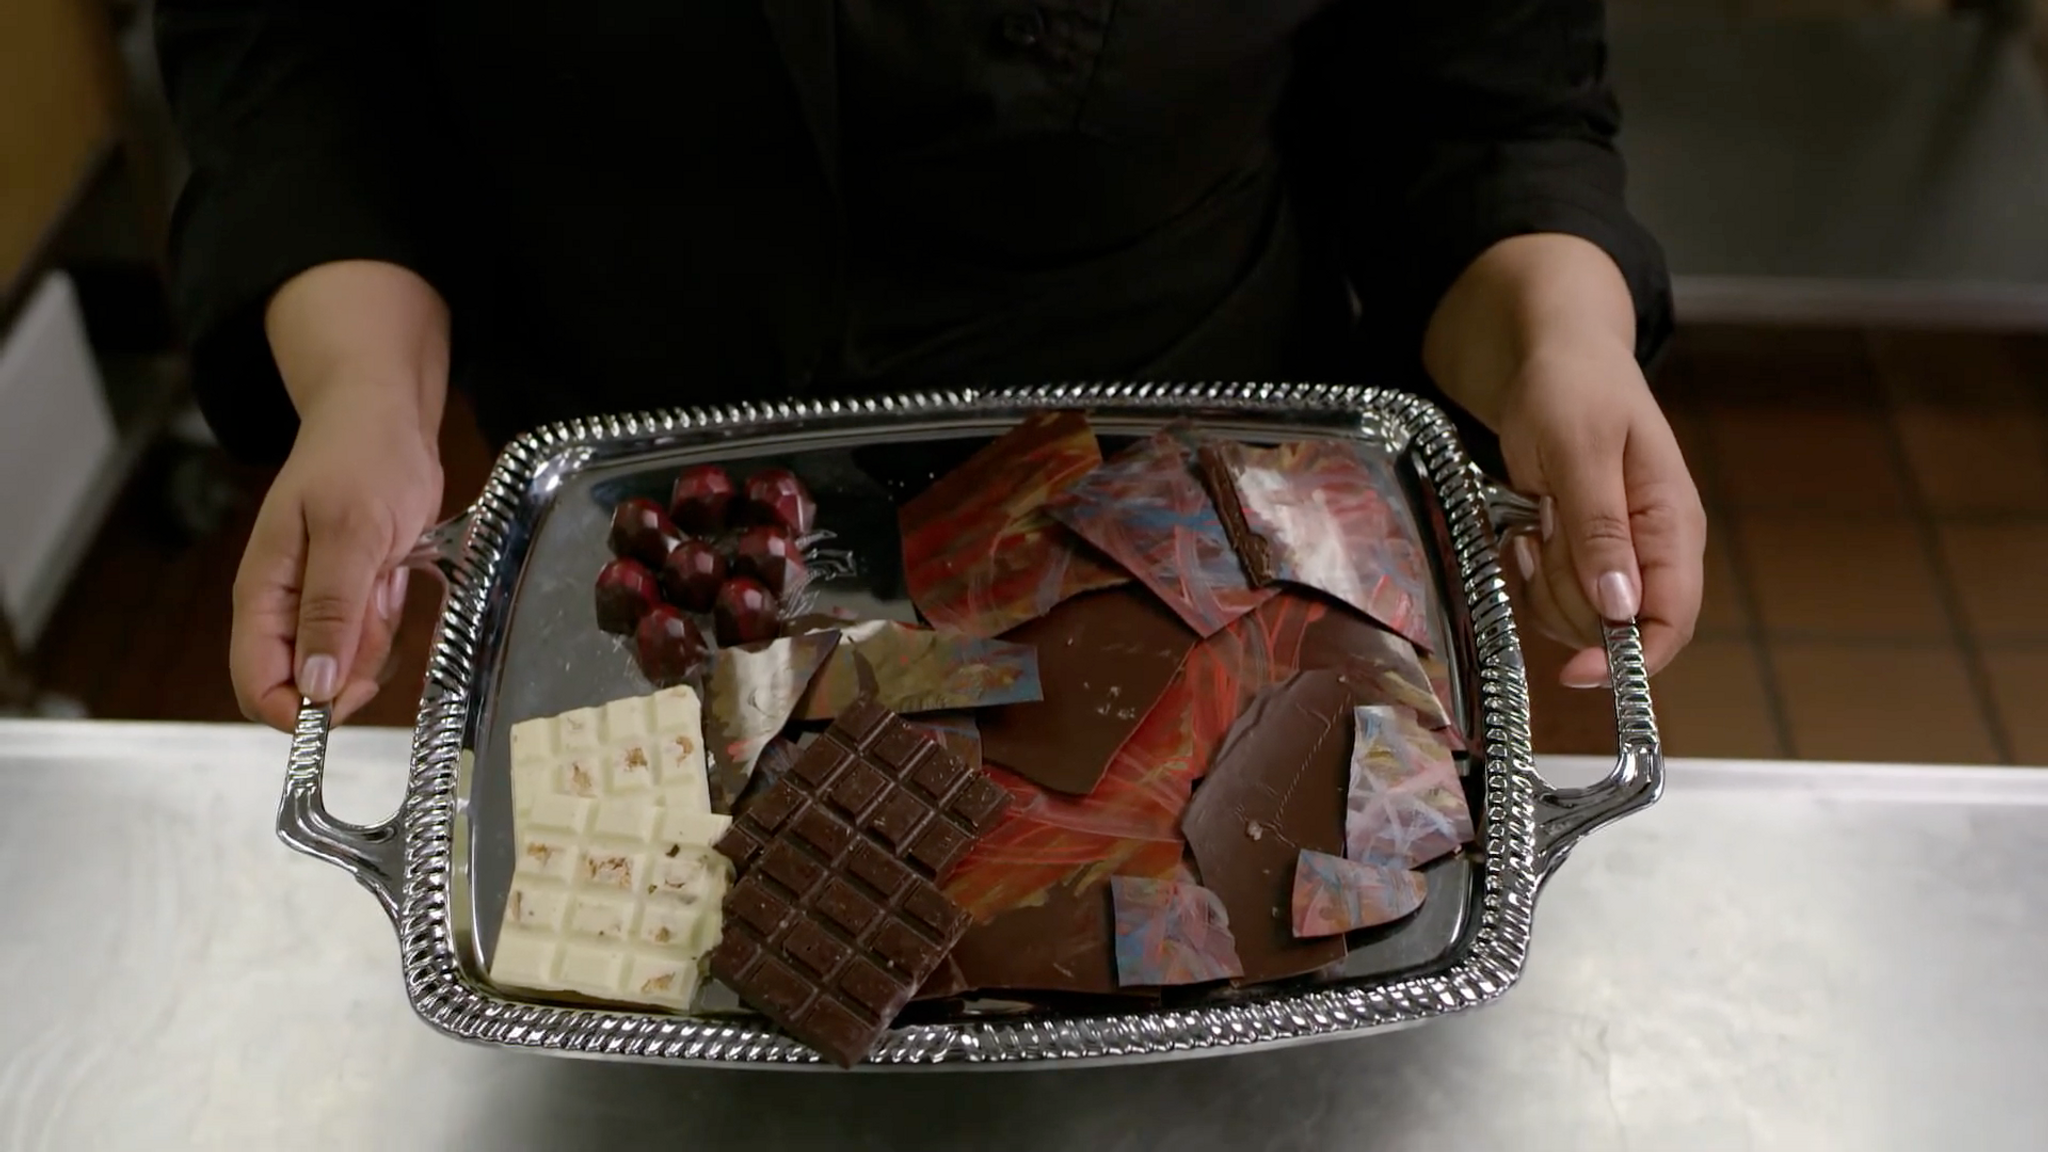 Harlem Chocolate Factory: cultural confectionery